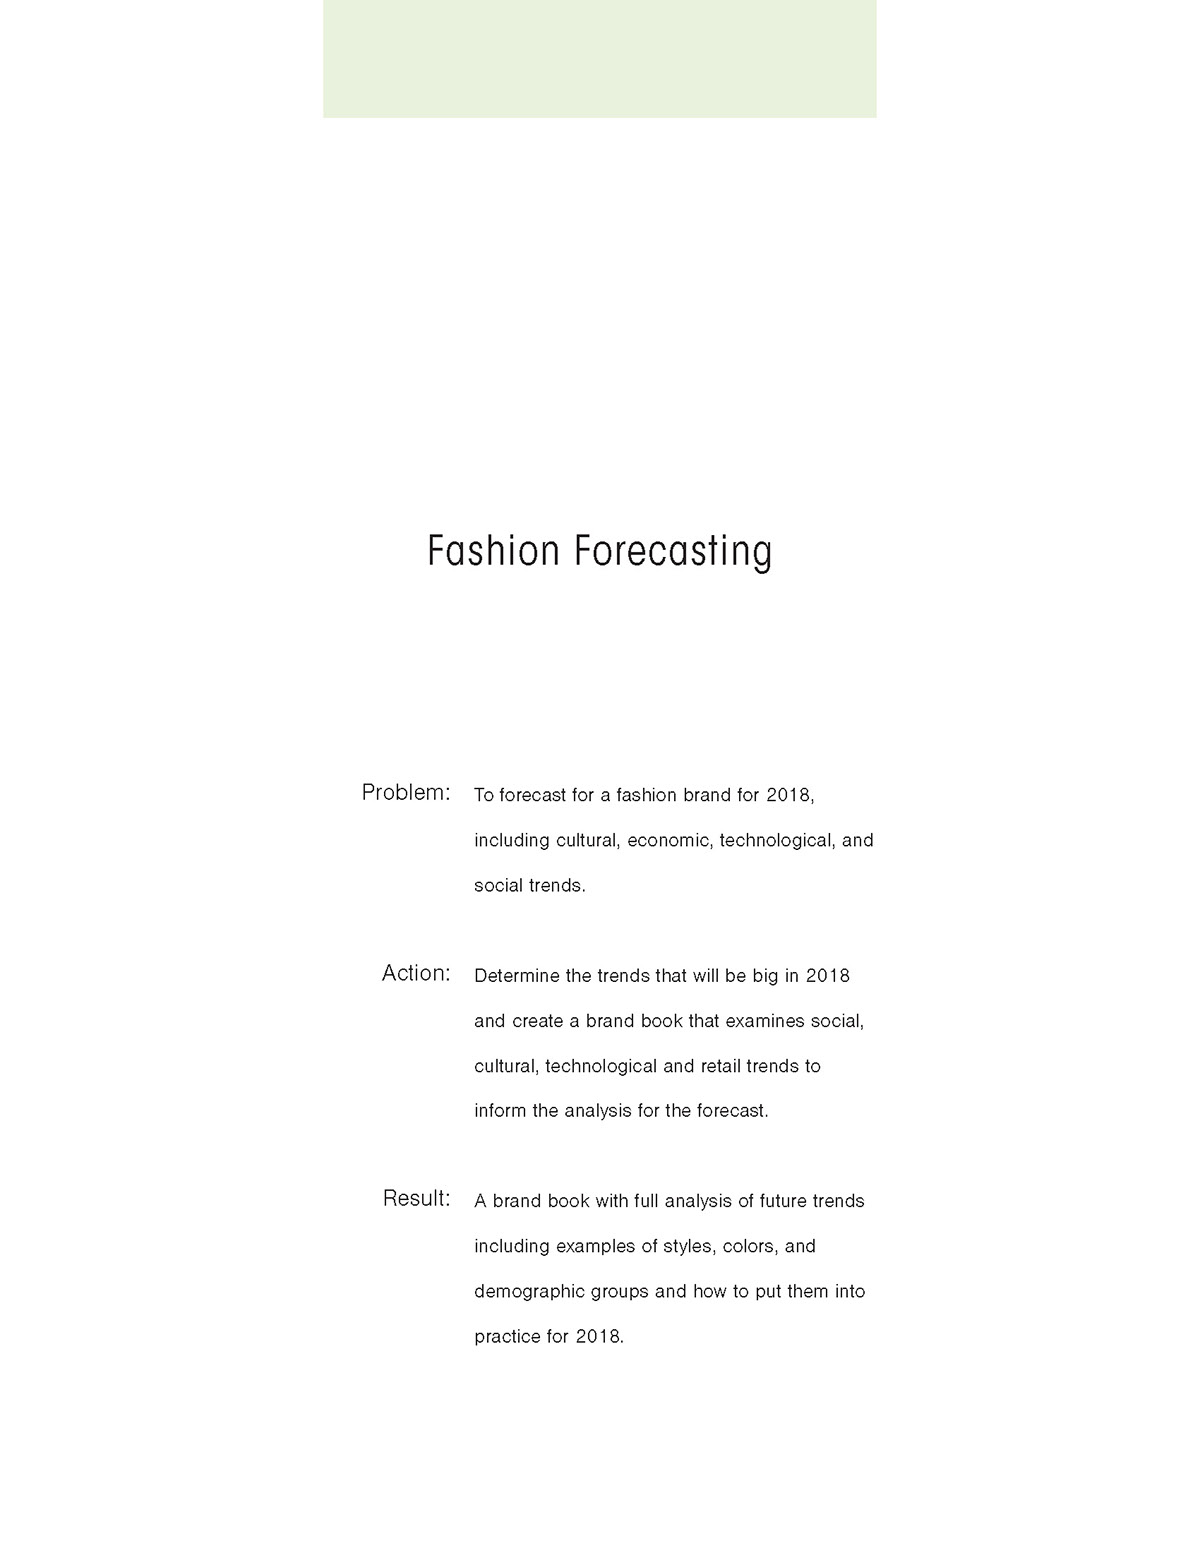 forecasting market research demographic analysis Zeitgeist Color Forecasting trends trend research trend forecasting